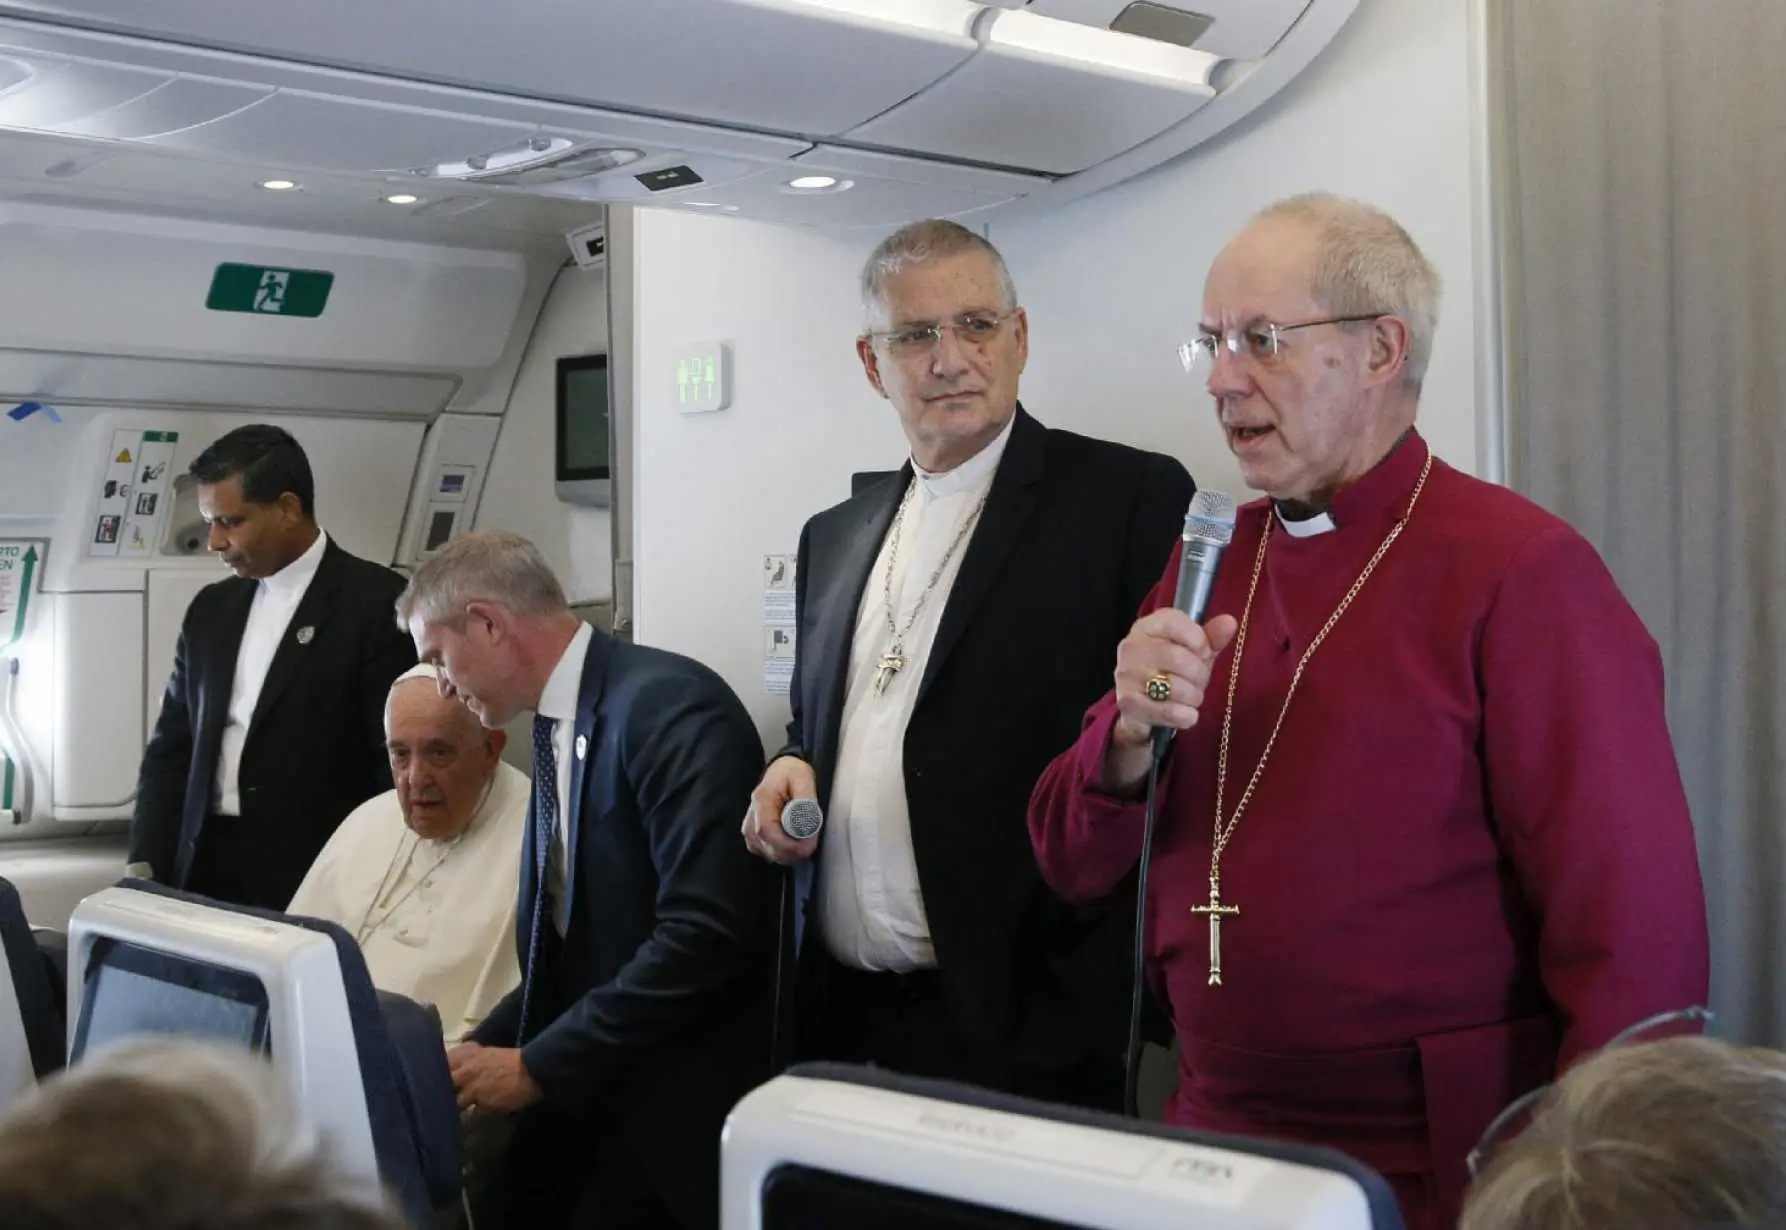 Anglican Archbishop Justin Welby, right, stands by Rev. Iain Greenshields, moderator of the Church of Scotland, and Pope Francis as he speaks to journalists aboard the flight from Juba, South Sudan, to Rome